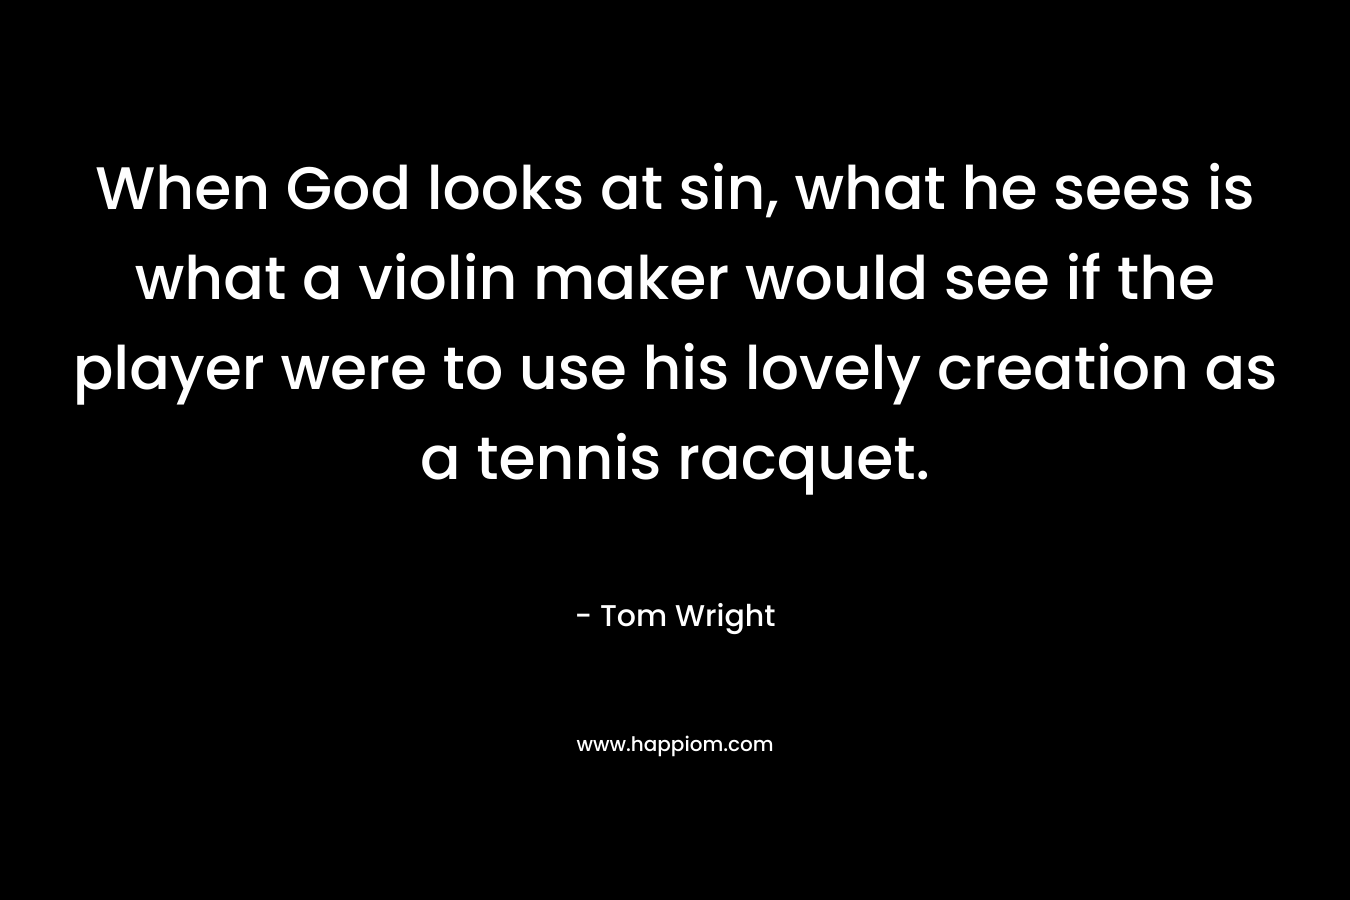 When God looks at sin, what he sees is what a violin maker would see if the player were to use his lovely creation as a tennis racquet. – Tom Wright